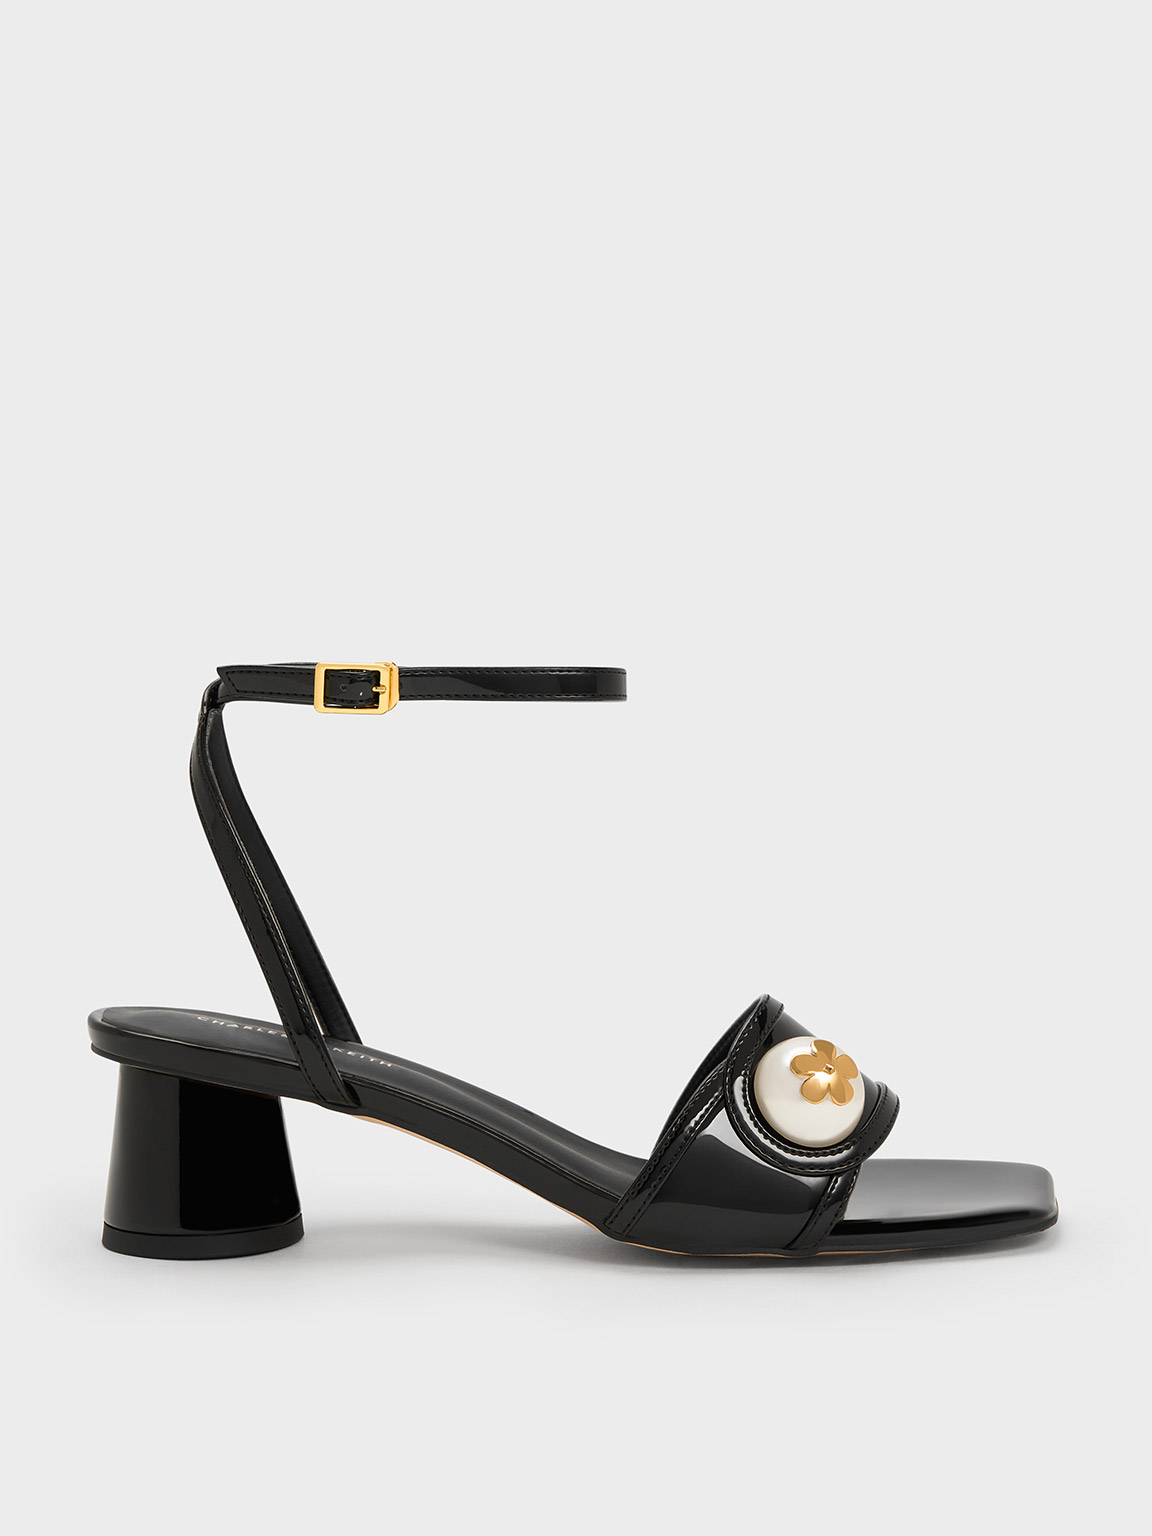 Pearl-Embellished Patent Sandals